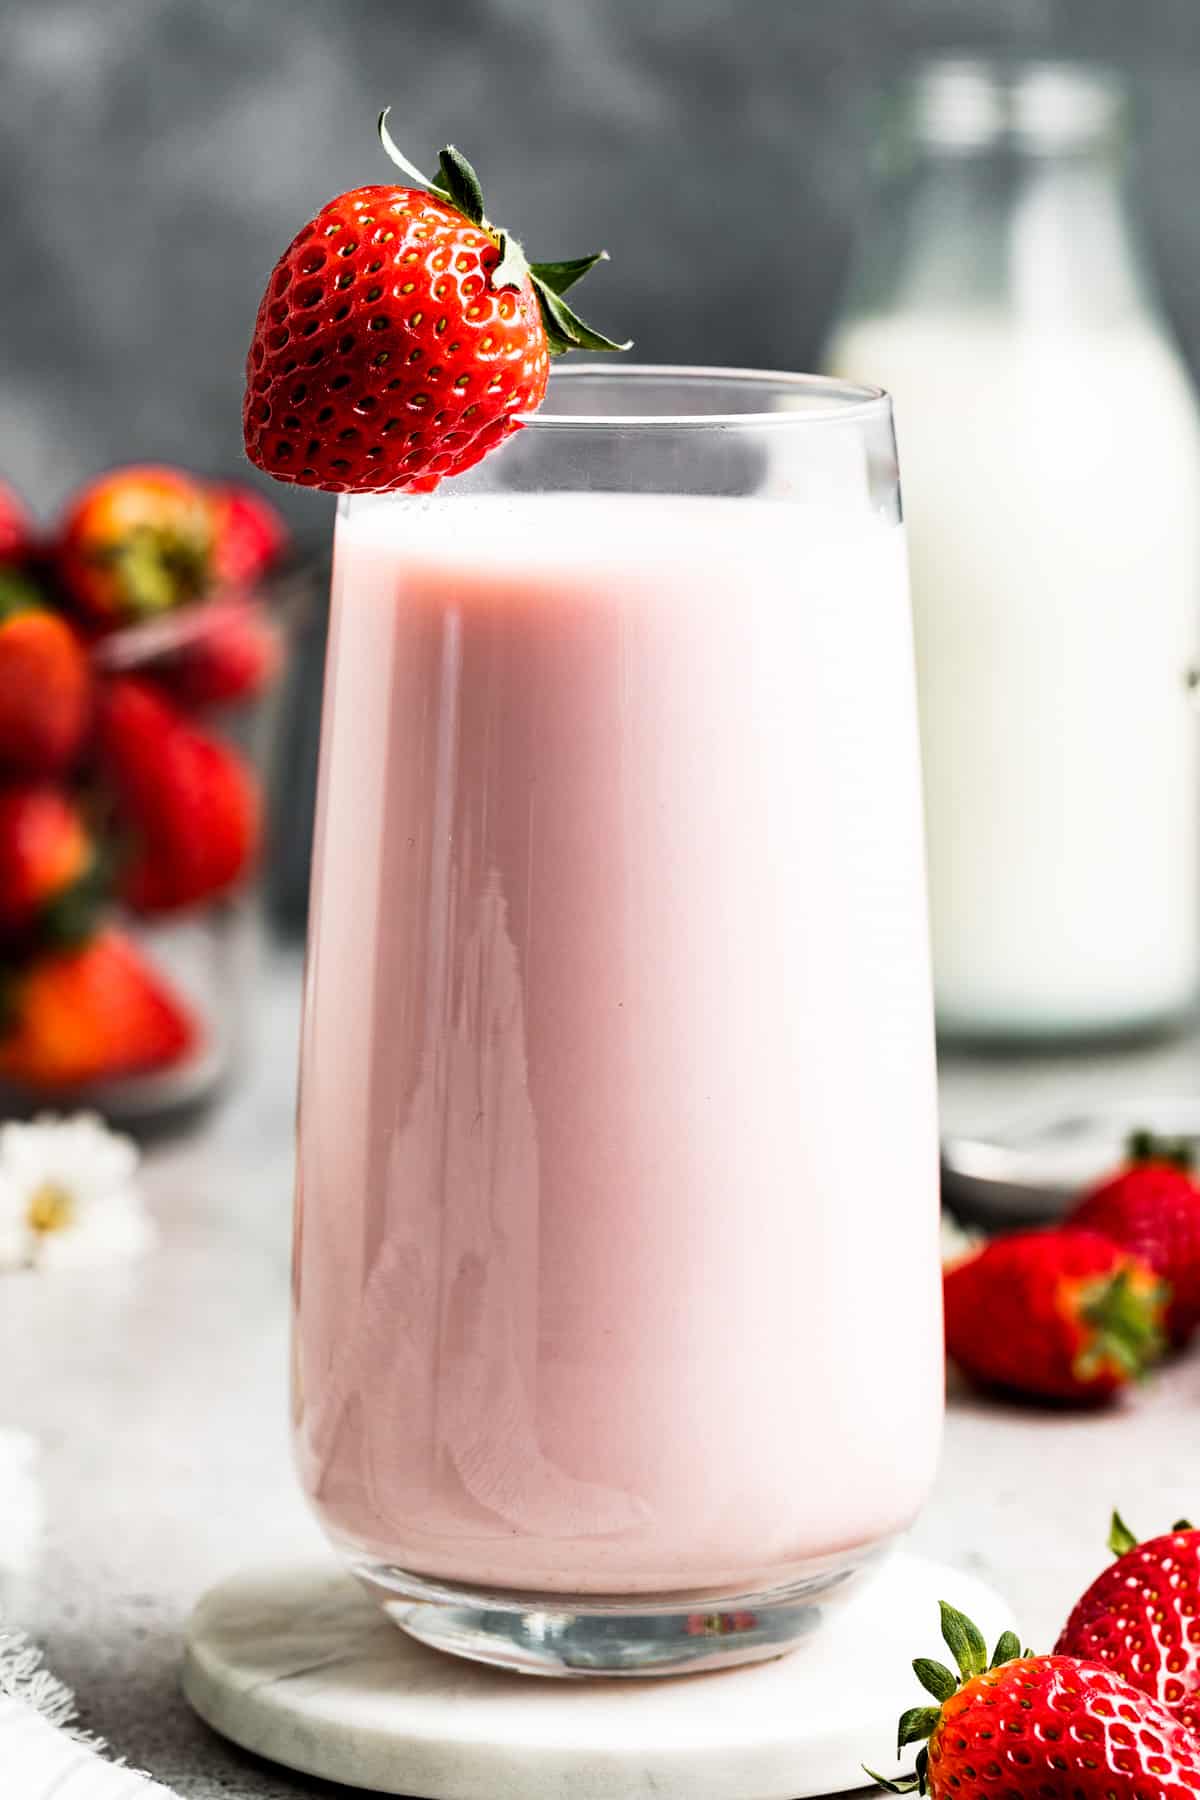 Strawberry milk in a glass with a strawberry on the edge of the glass. Fresh strawberries and milk are placed behind the milk glass.